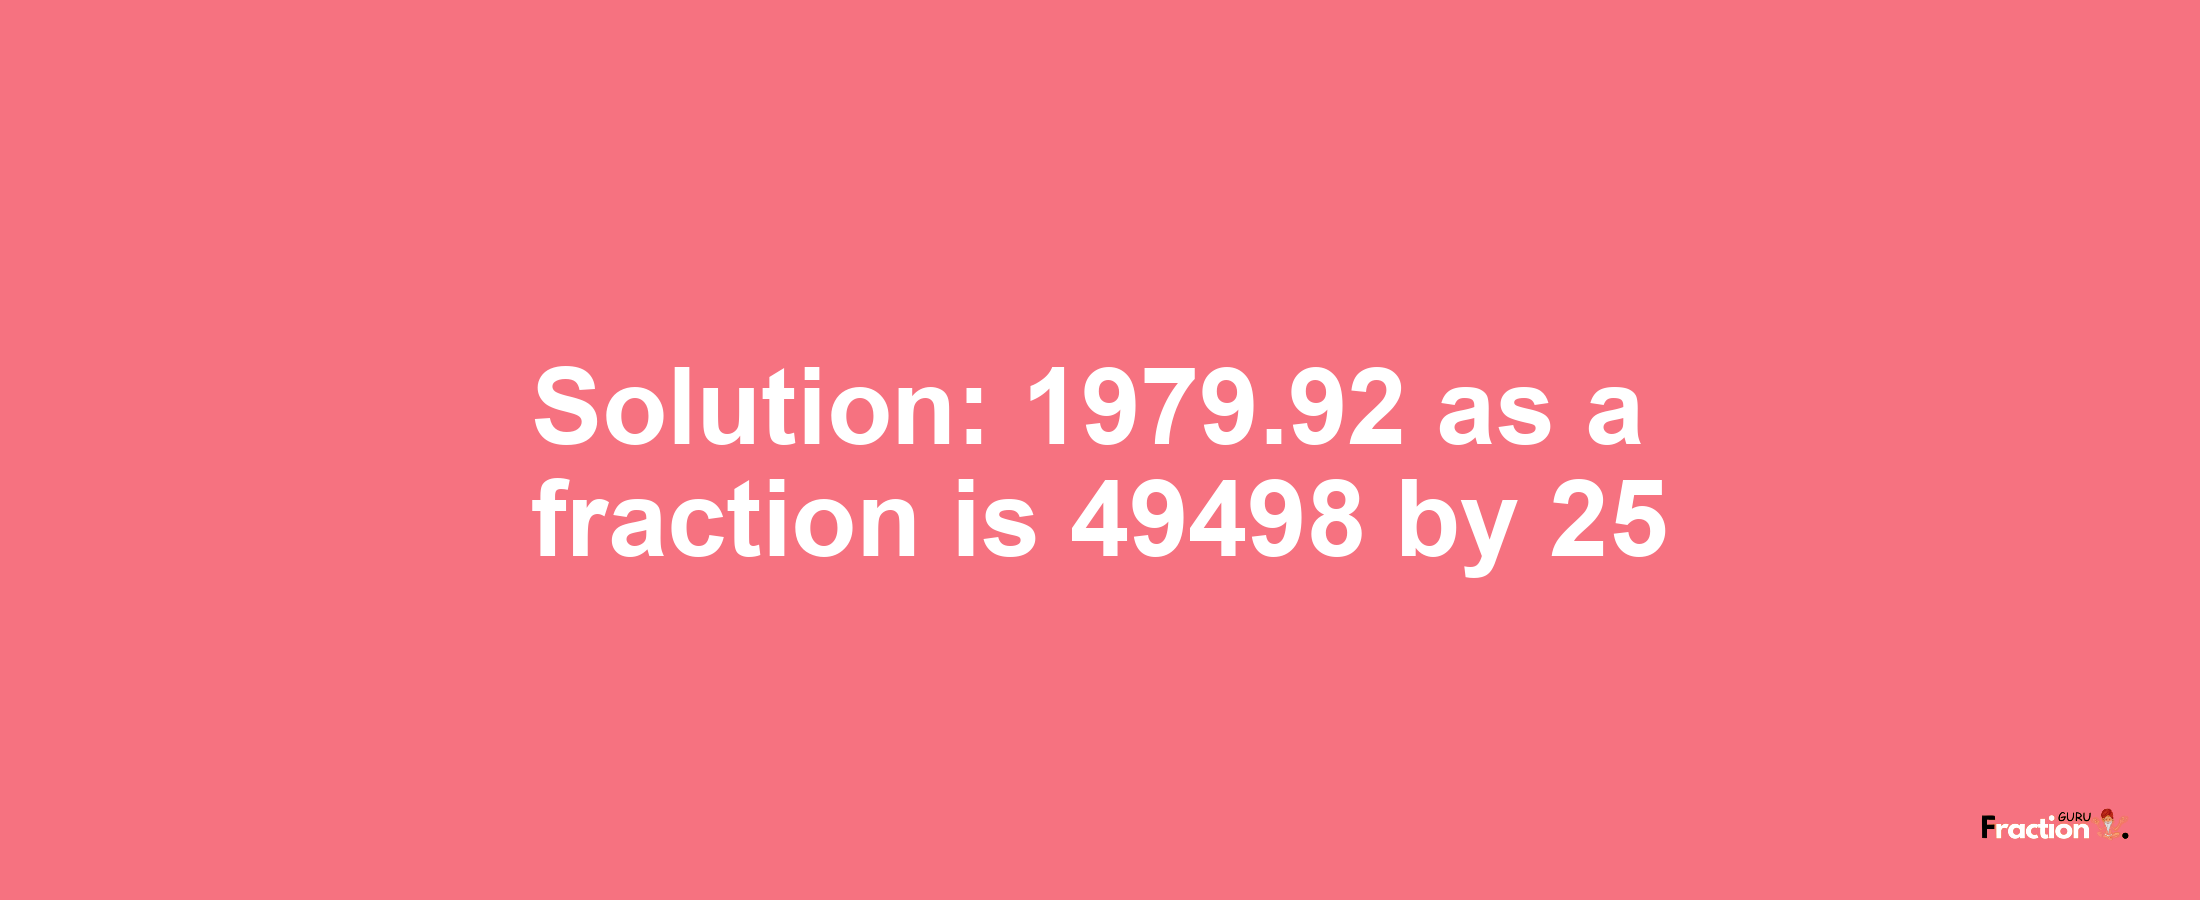 Solution:1979.92 as a fraction is 49498/25